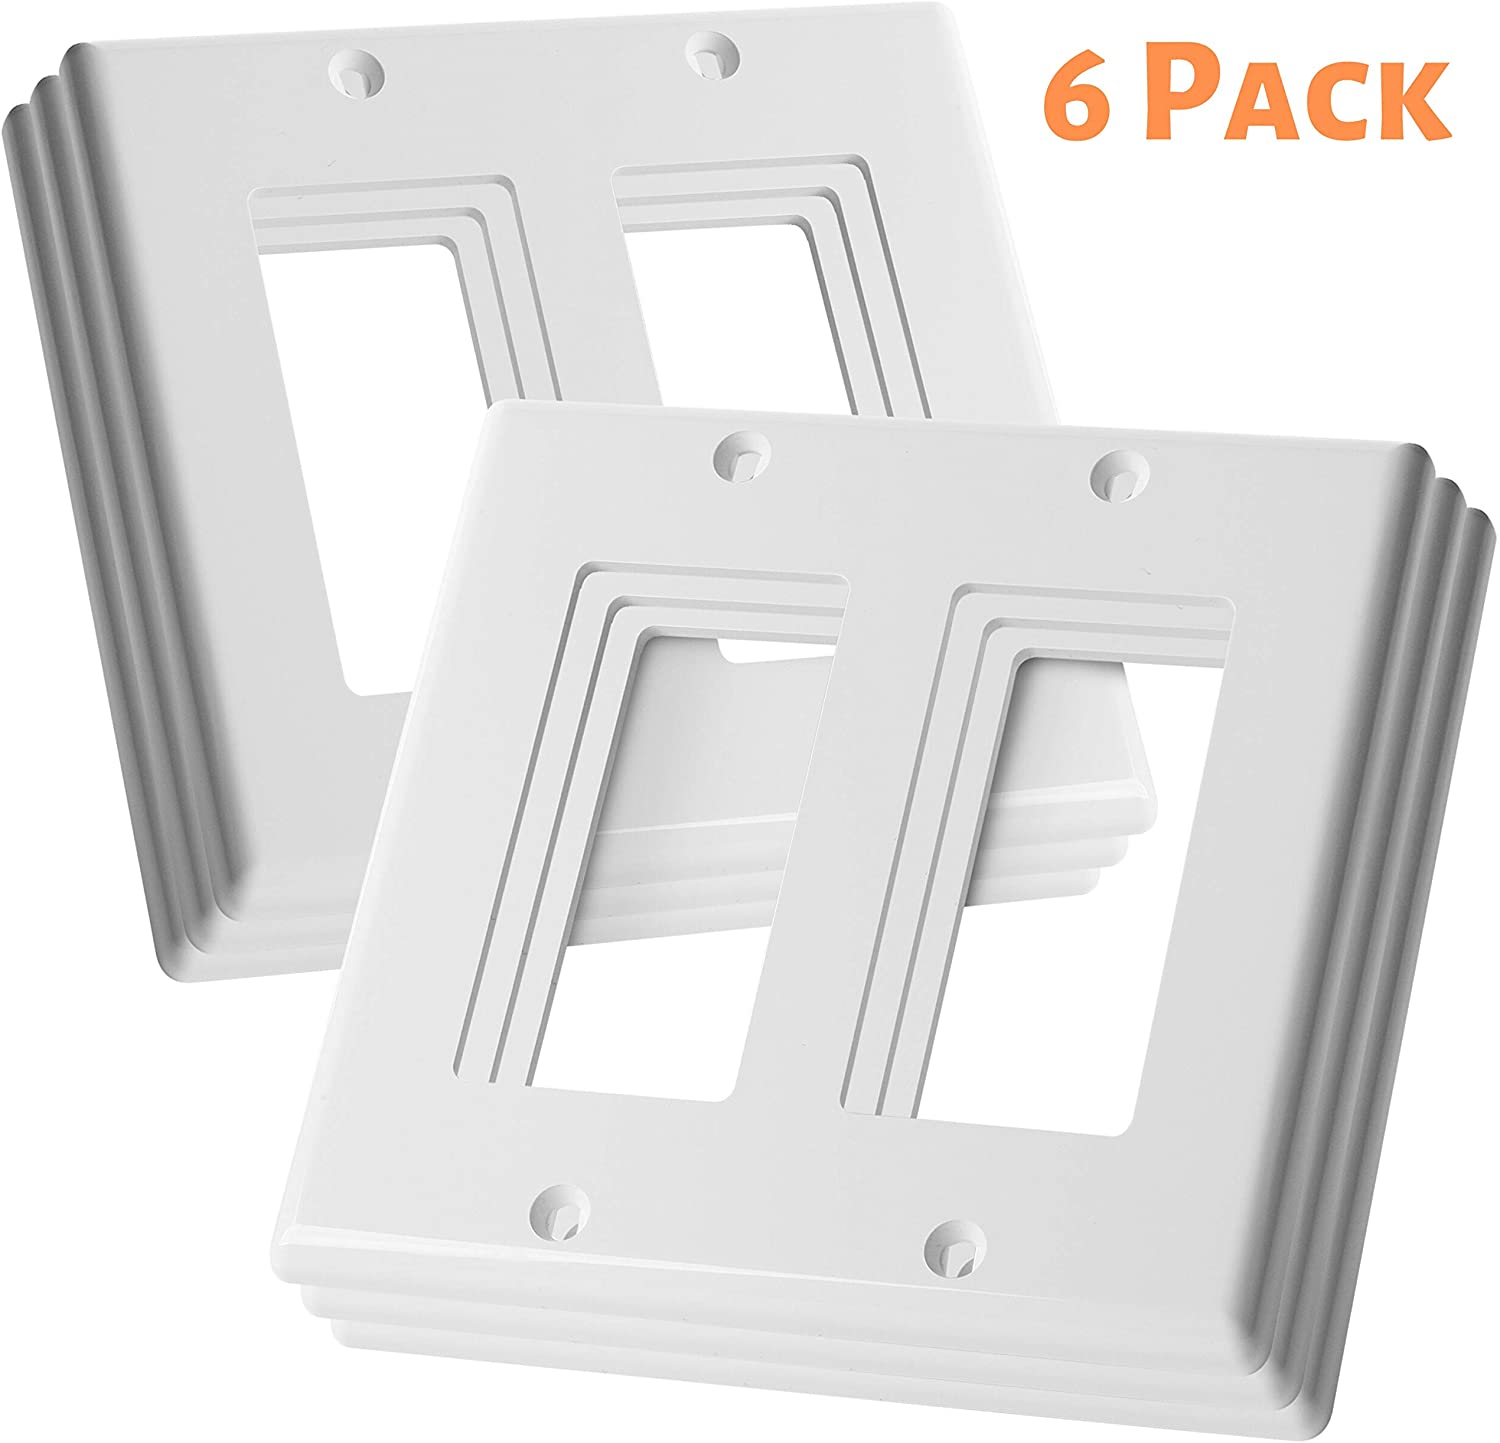 2-Gang Decora Decorator Flush Wall Face Plate Outlet Cover GFCI White 100 Pack 